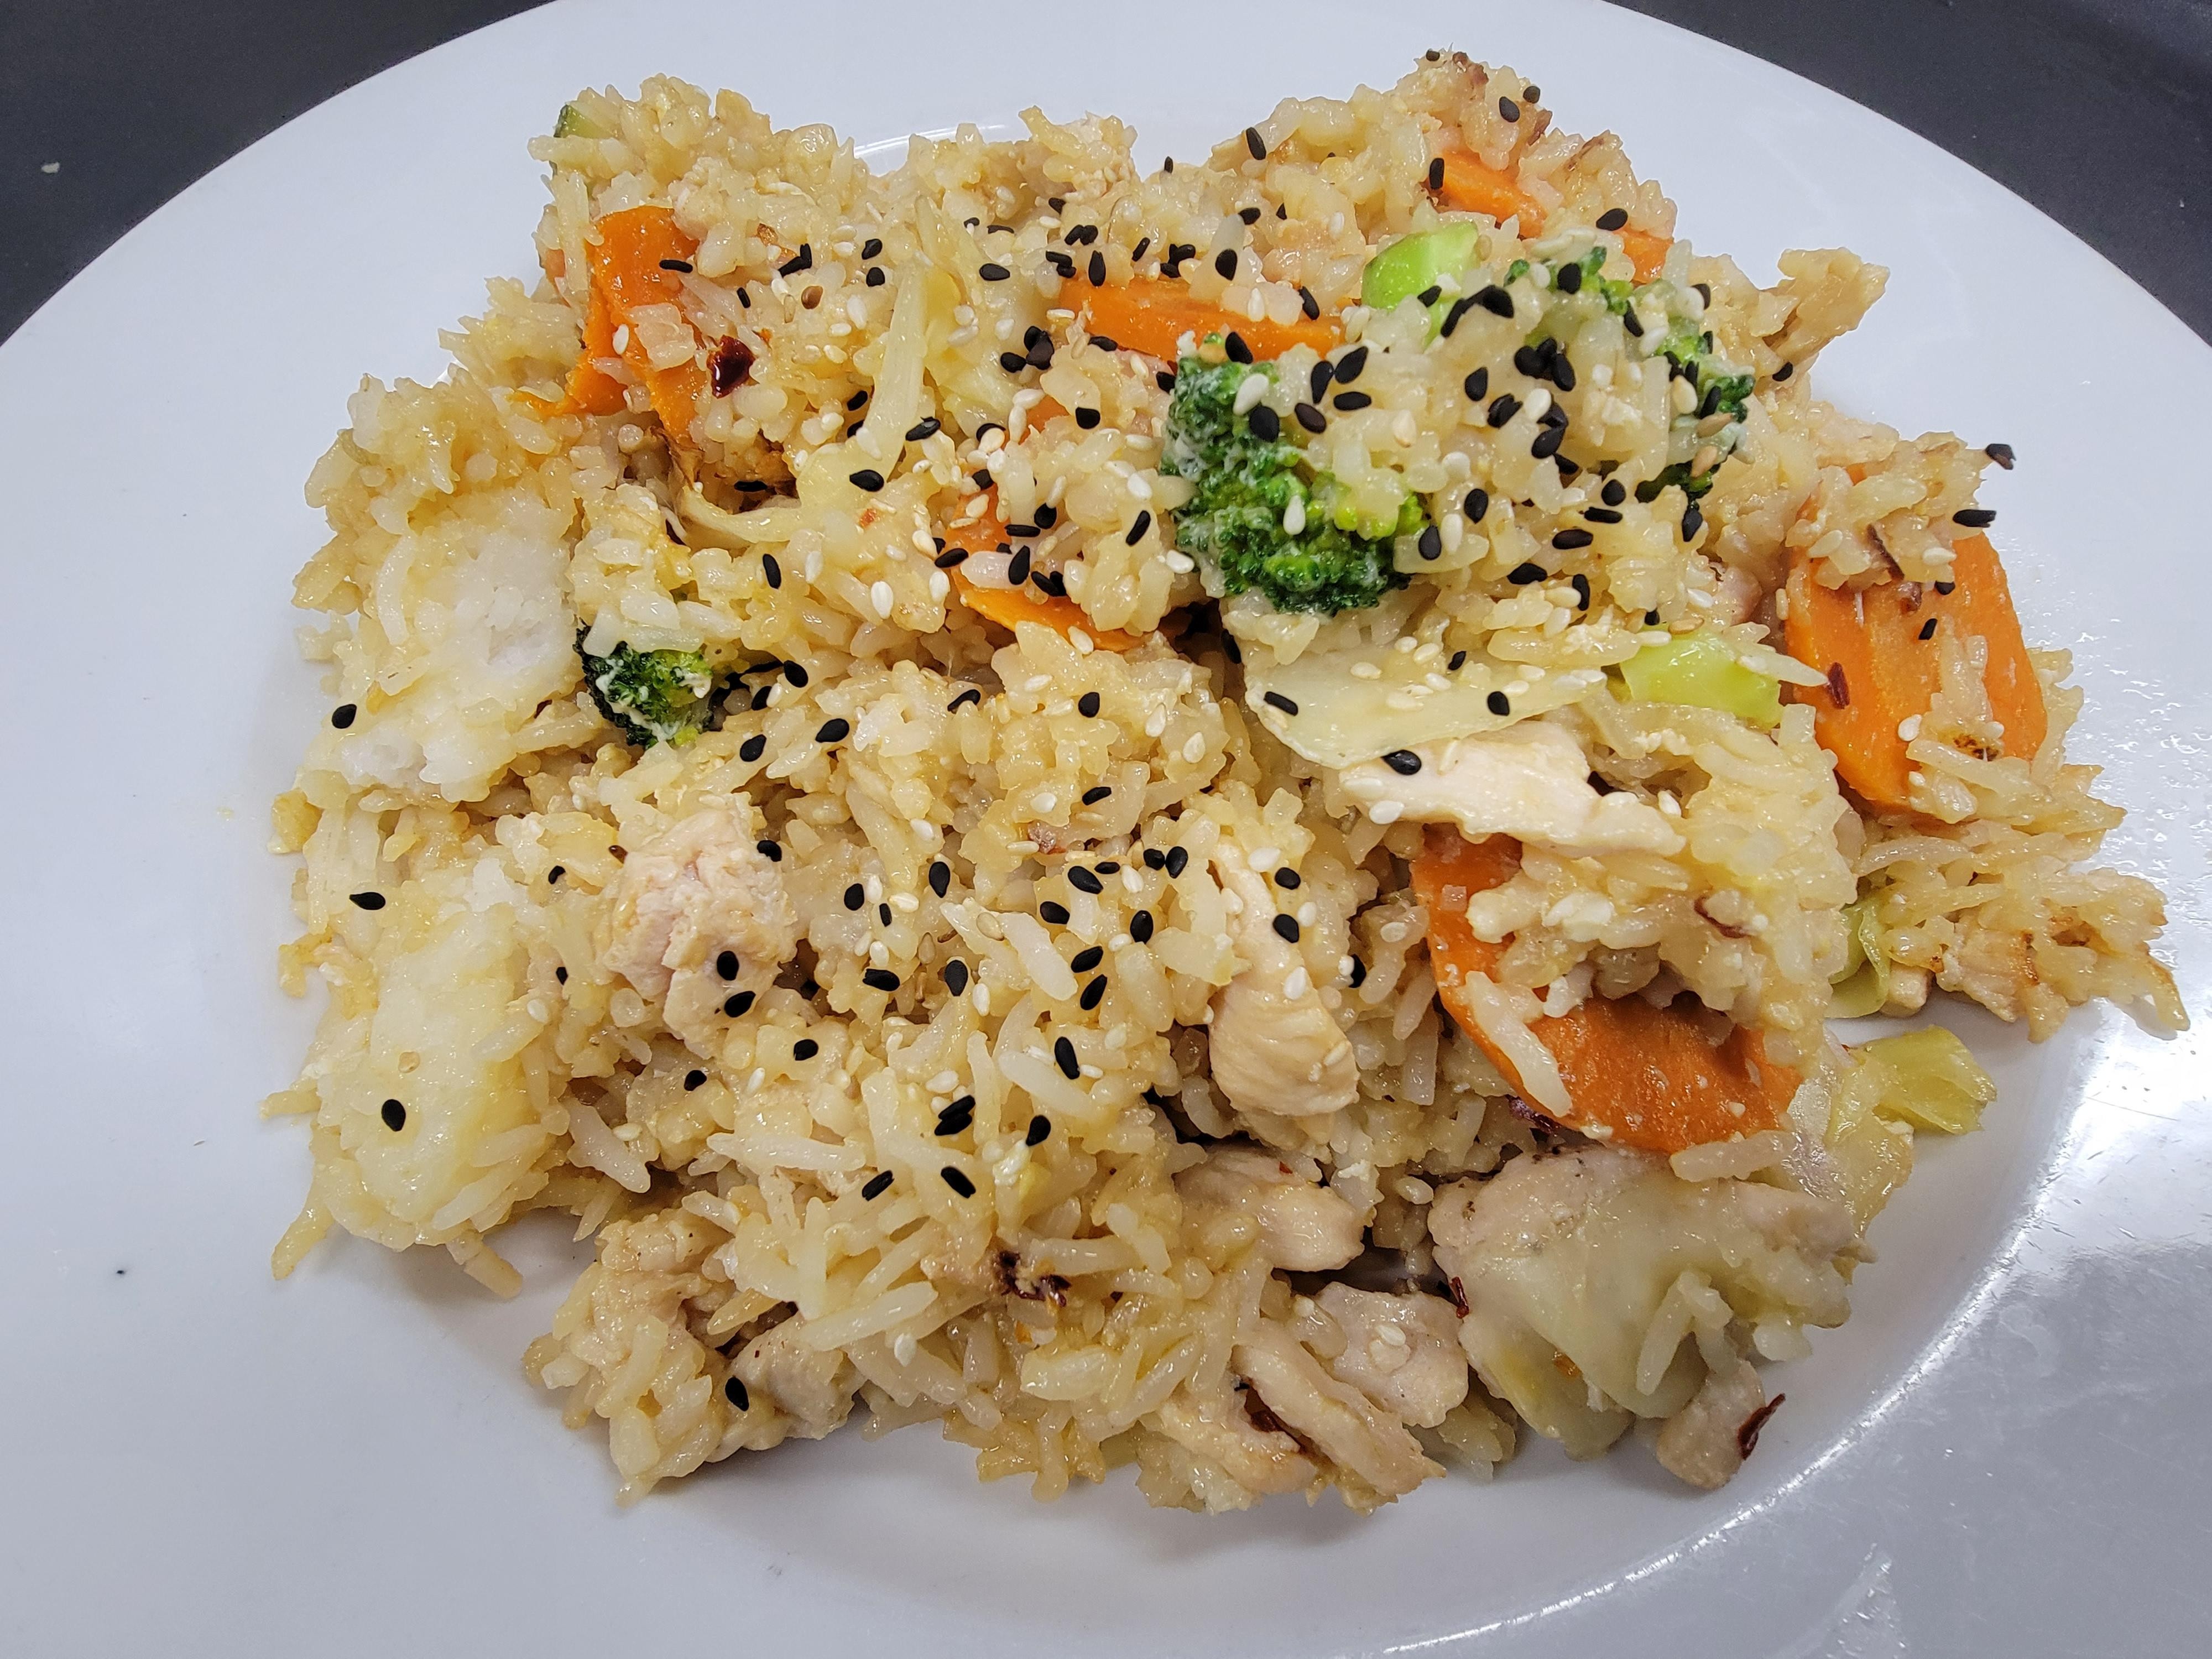 HOUSE SPECIAL FRIED RICE